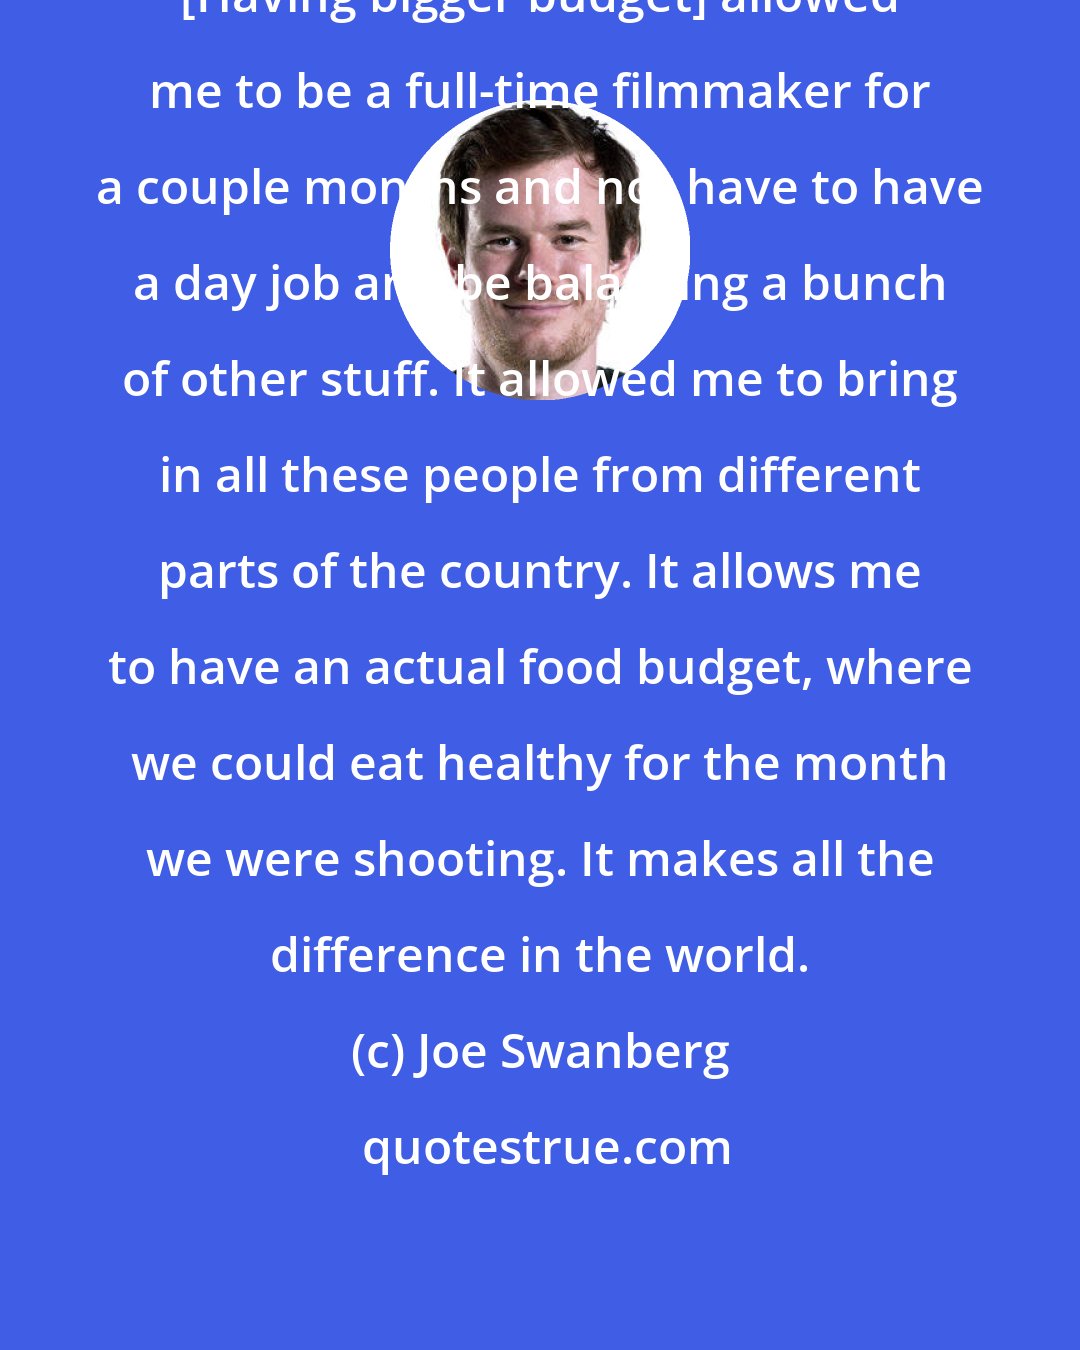 Joe Swanberg: [Having bigger budget] allowed me to be a full-time filmmaker for a couple months and not have to have a day job and be balancing a bunch of other stuff. It allowed me to bring in all these people from different parts of the country. It allows me to have an actual food budget, where we could eat healthy for the month we were shooting. It makes all the difference in the world.